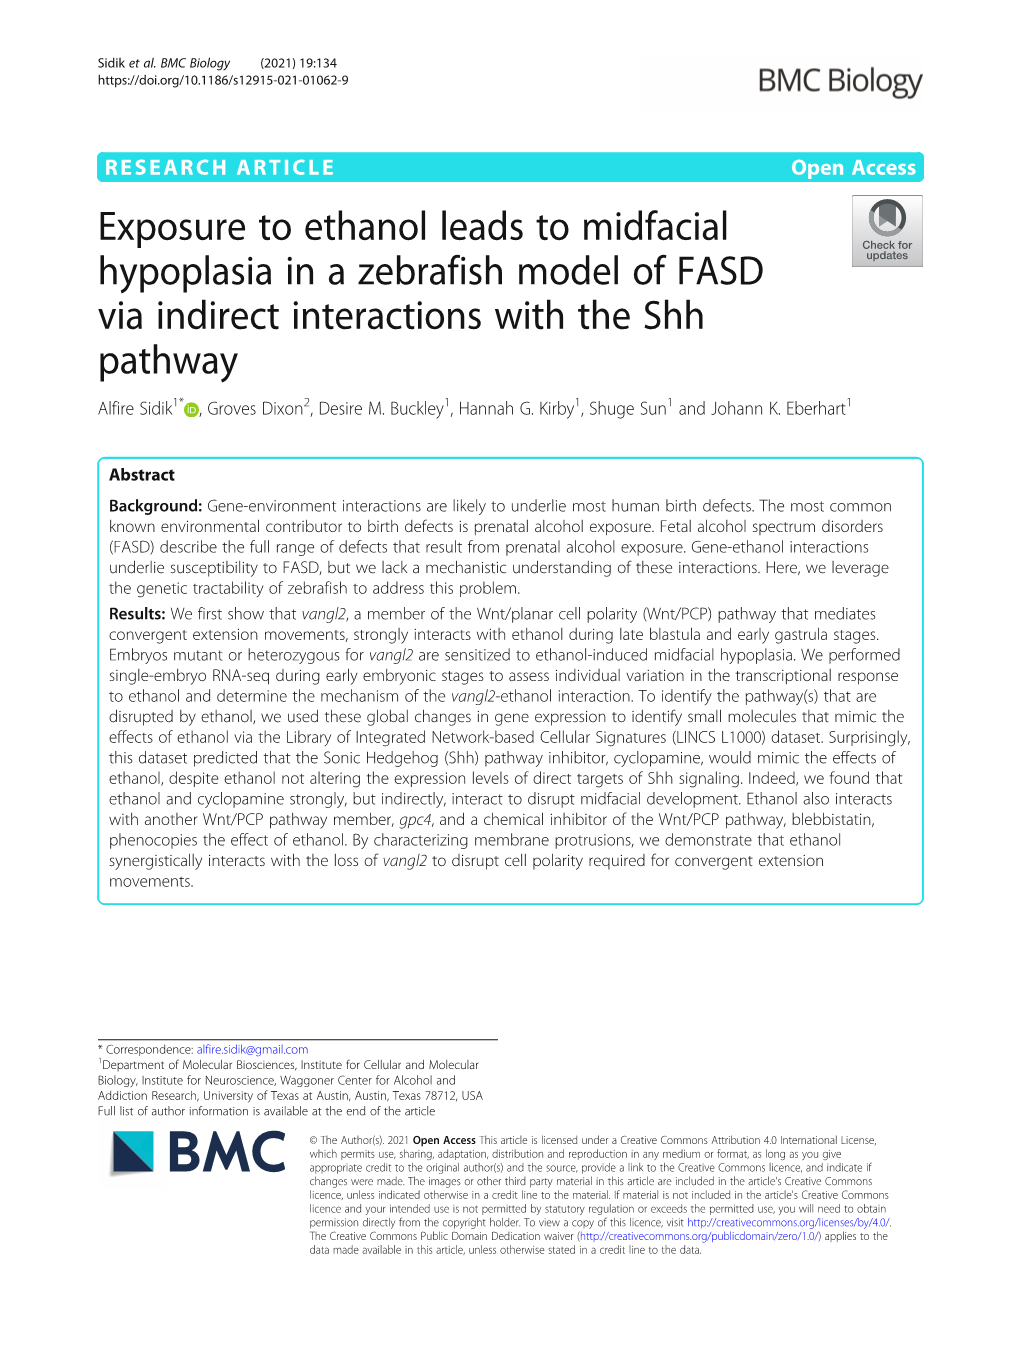 Exposure to Ethanol Leads to Midfacial Hypoplasia in a Zebrafish Model of FASD Via Indirect Interactions with the Shh Pathway Alfire Sidik1* , Groves Dixon2, Desire M